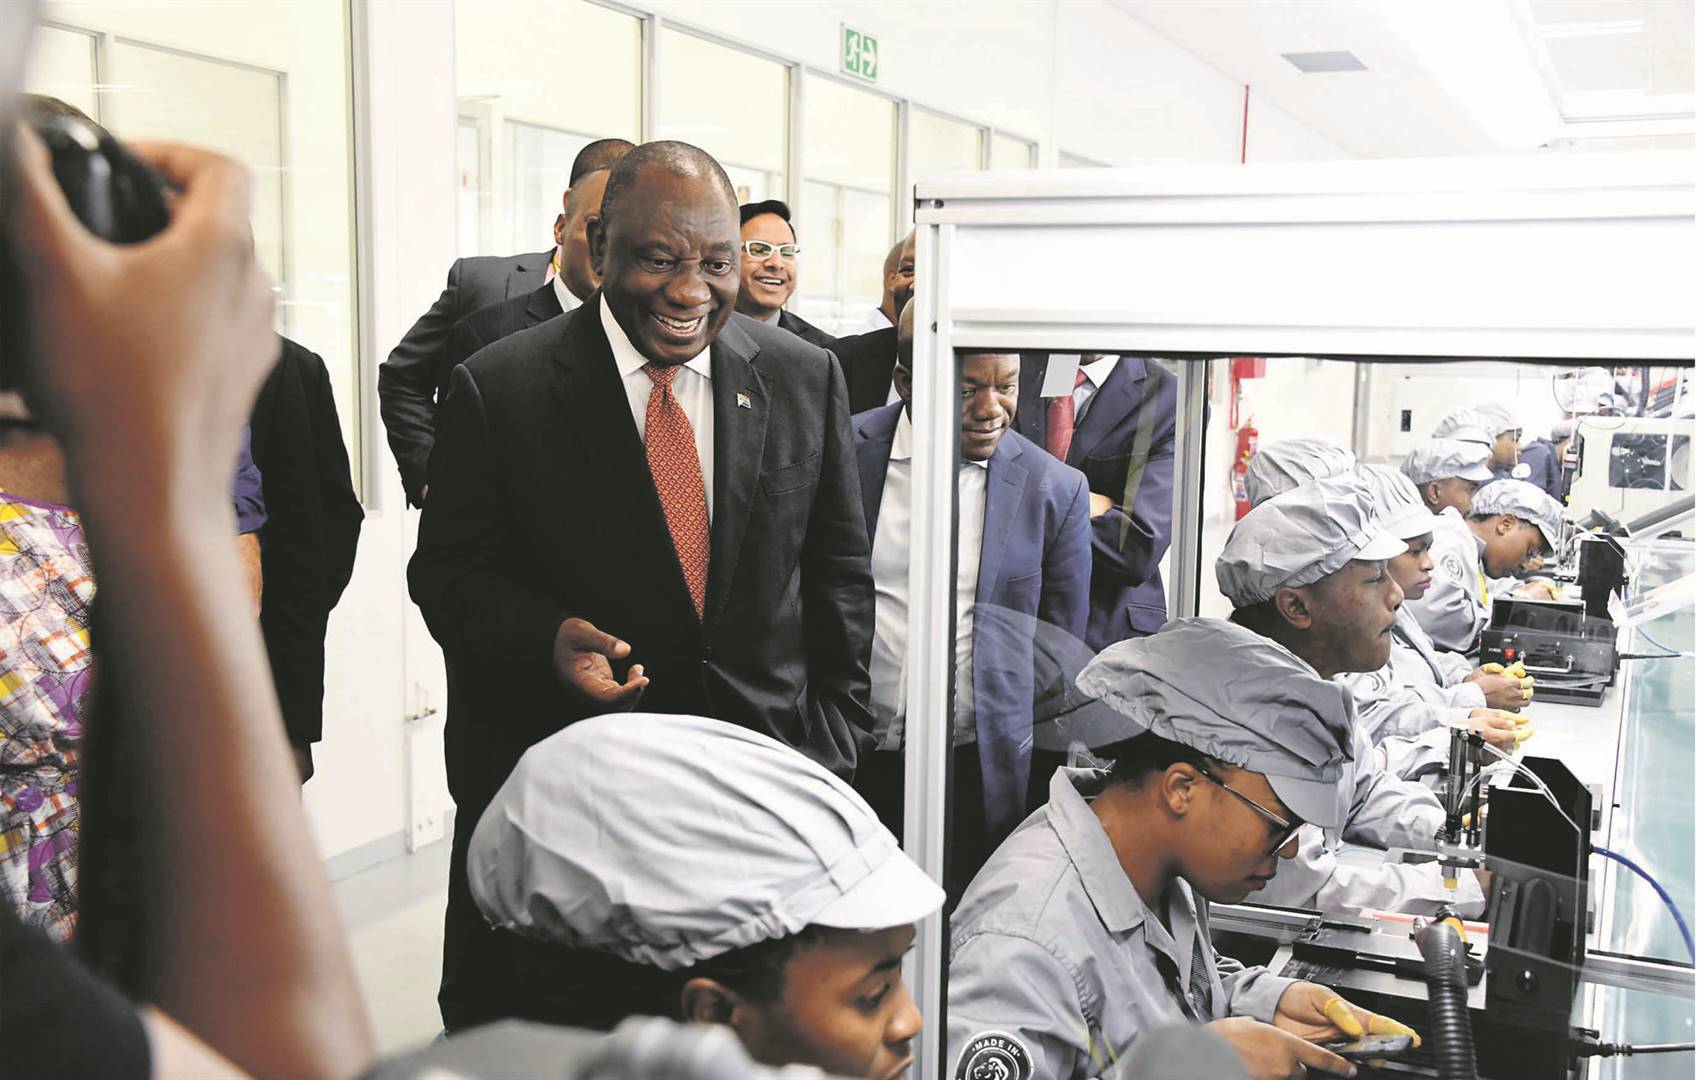 President Cyril Ramaphosa witnessed the opening of the Mara Group smartphone factory in Durban on Thursday last week, the second to be opened by the group on the continent. The first plant was opened in Kigali, Rwanda last week